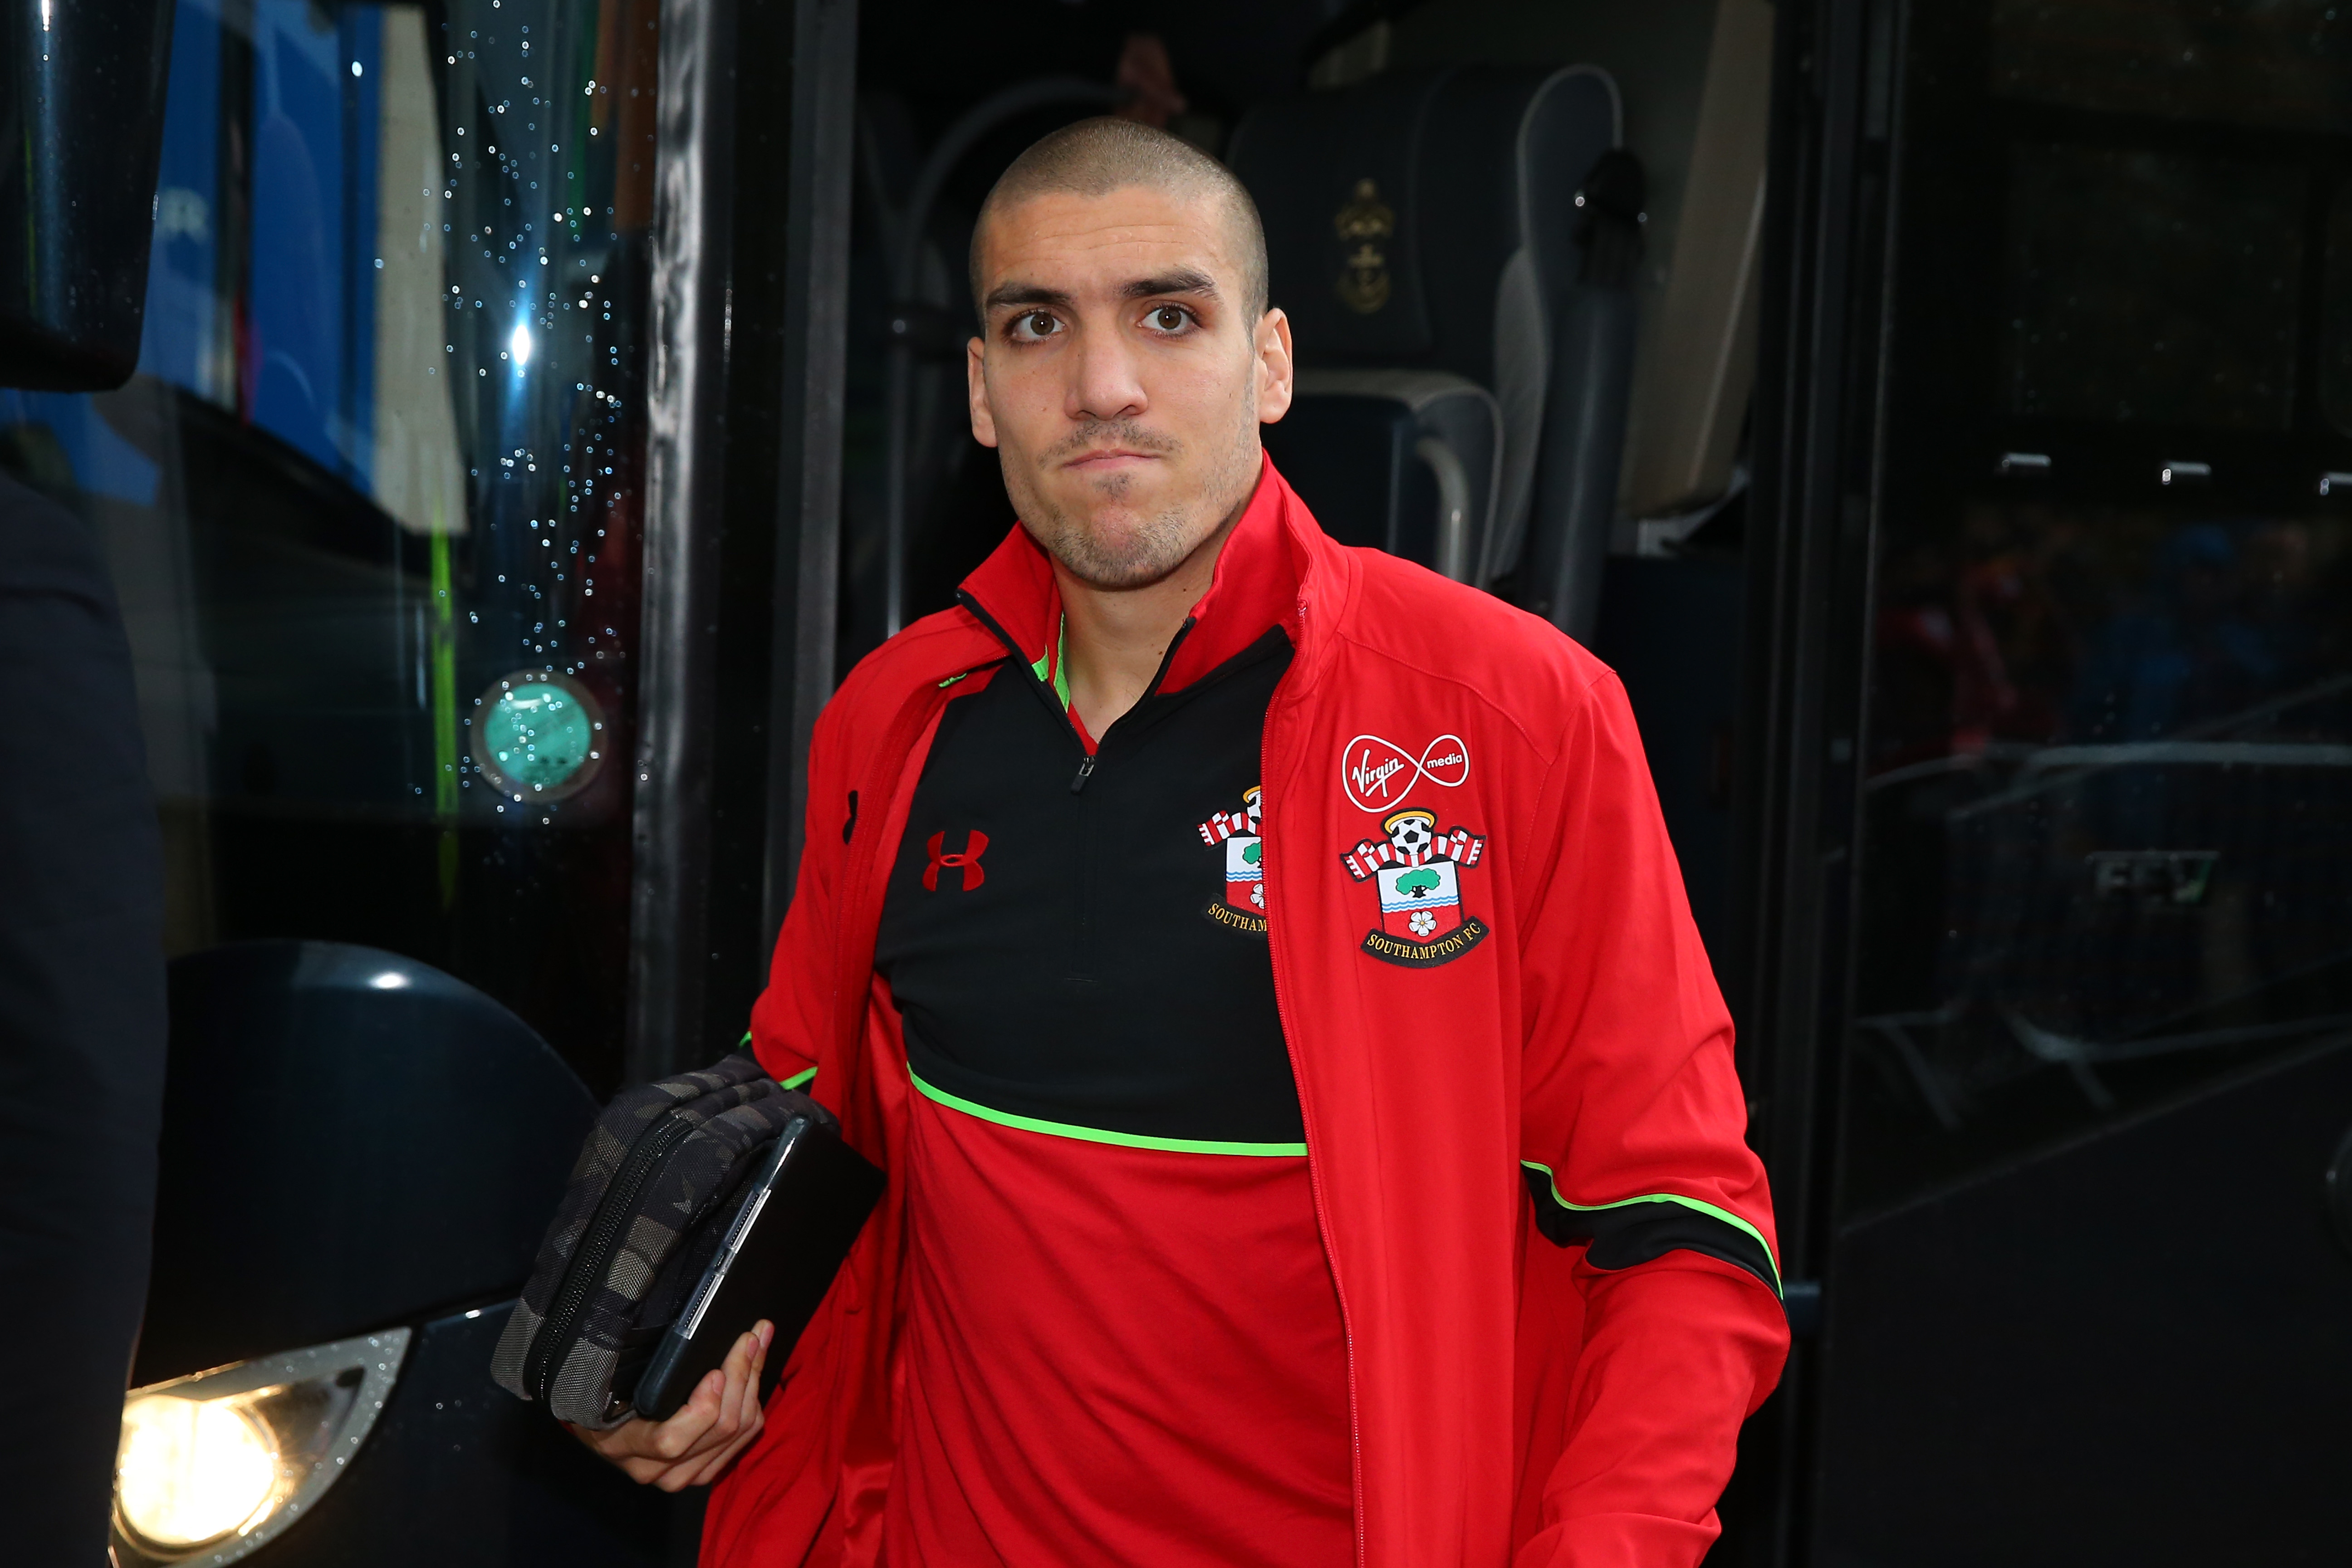 HULL, ENGLAND - NOVEMBER 06:  Oriol Romeu of Southampton arrives prior to the Premier League match between Hull City and Southampton at KC Stadium on November 6, 2016 in Hull, England.  (Photo by Alex Livesey/Getty Images)